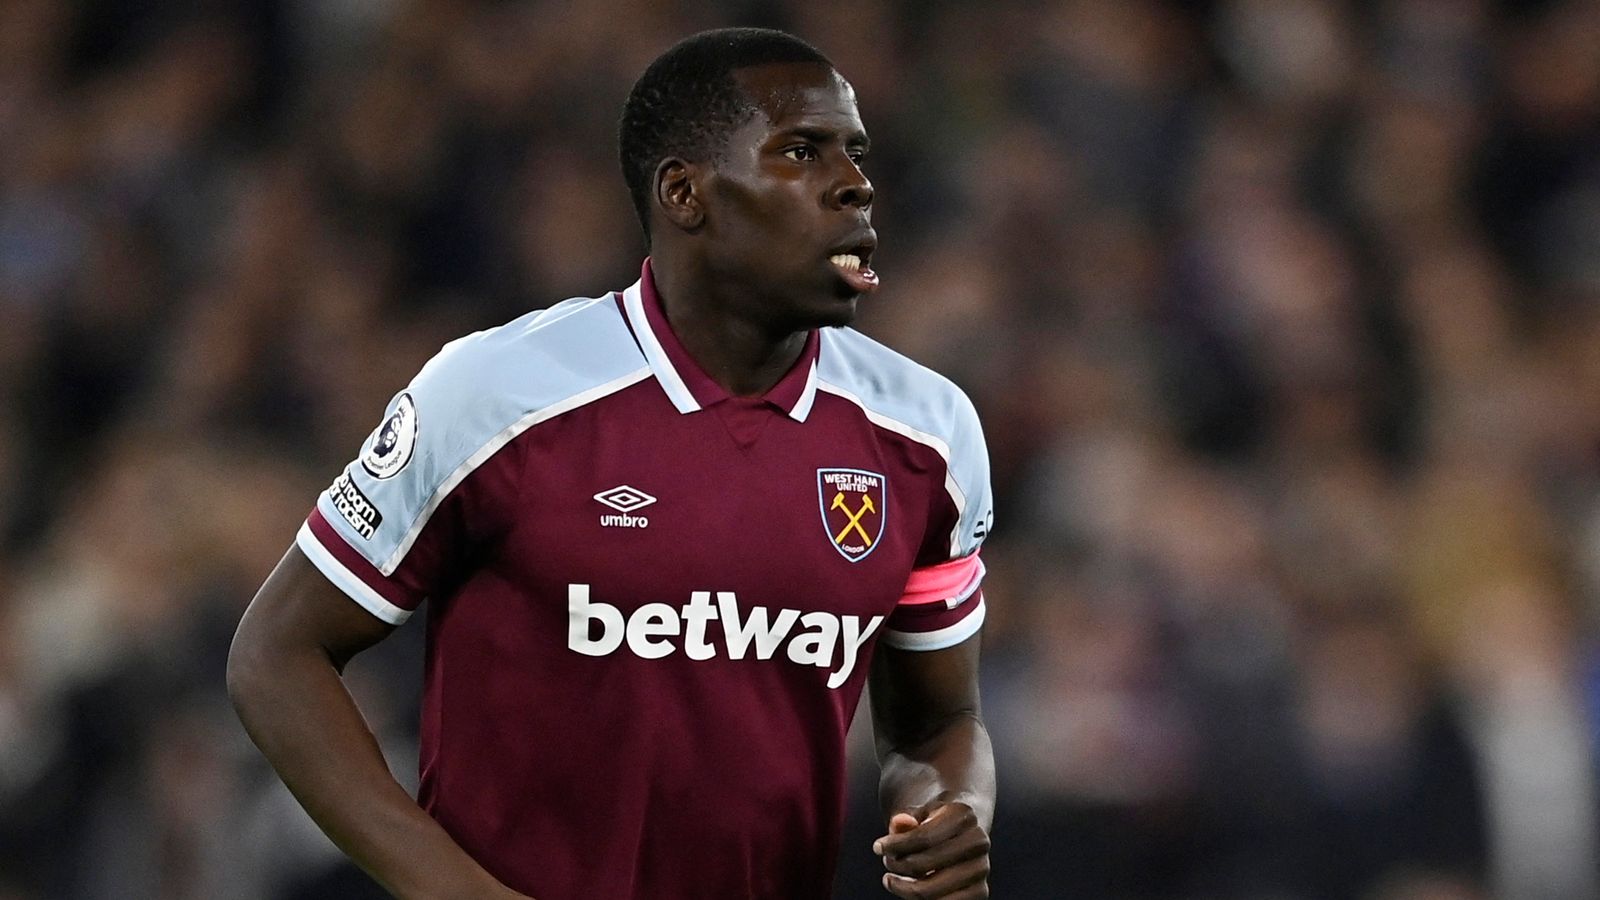 Zouma: It's very special for me and my family to captain West Ham